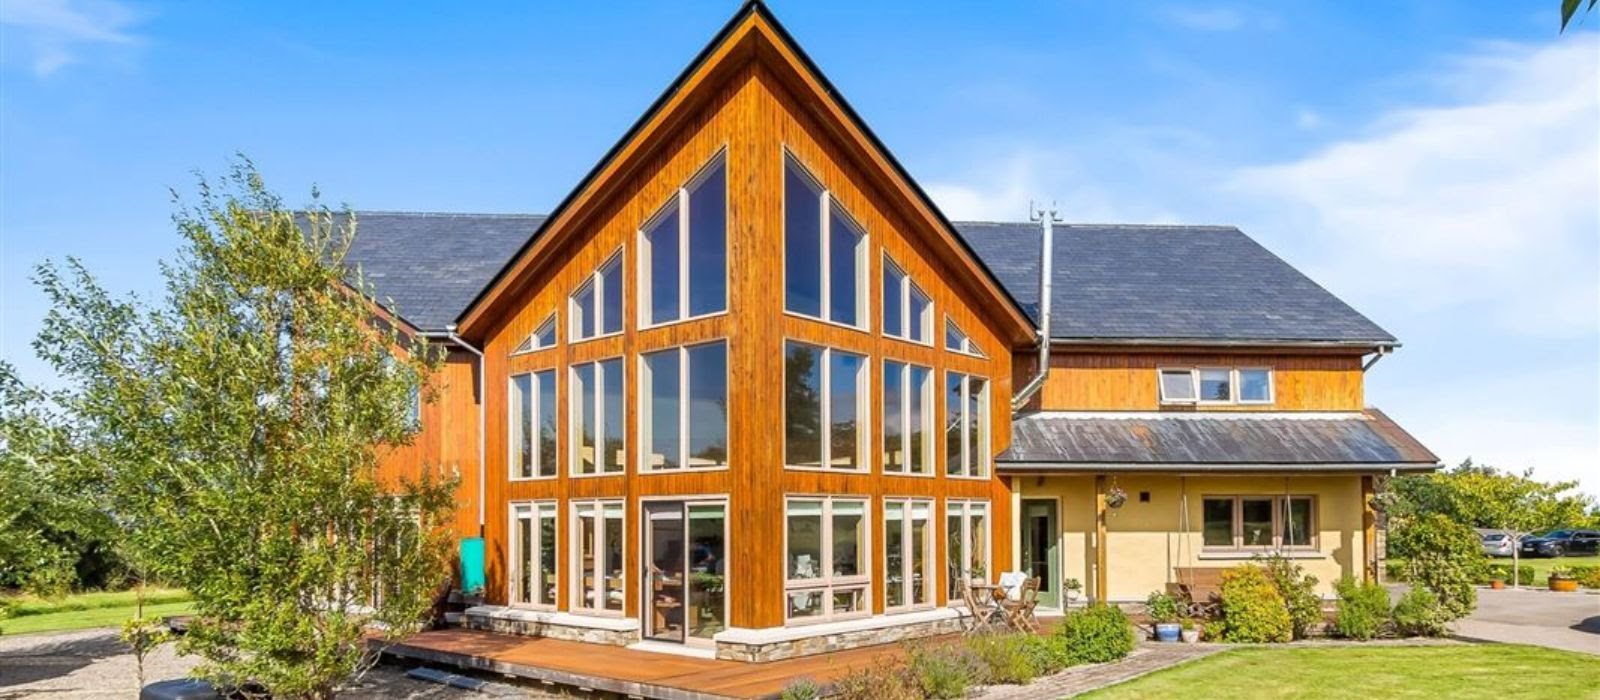 This one of a kind Westport property overlooking Croagh Patrick is on the market for €985,000